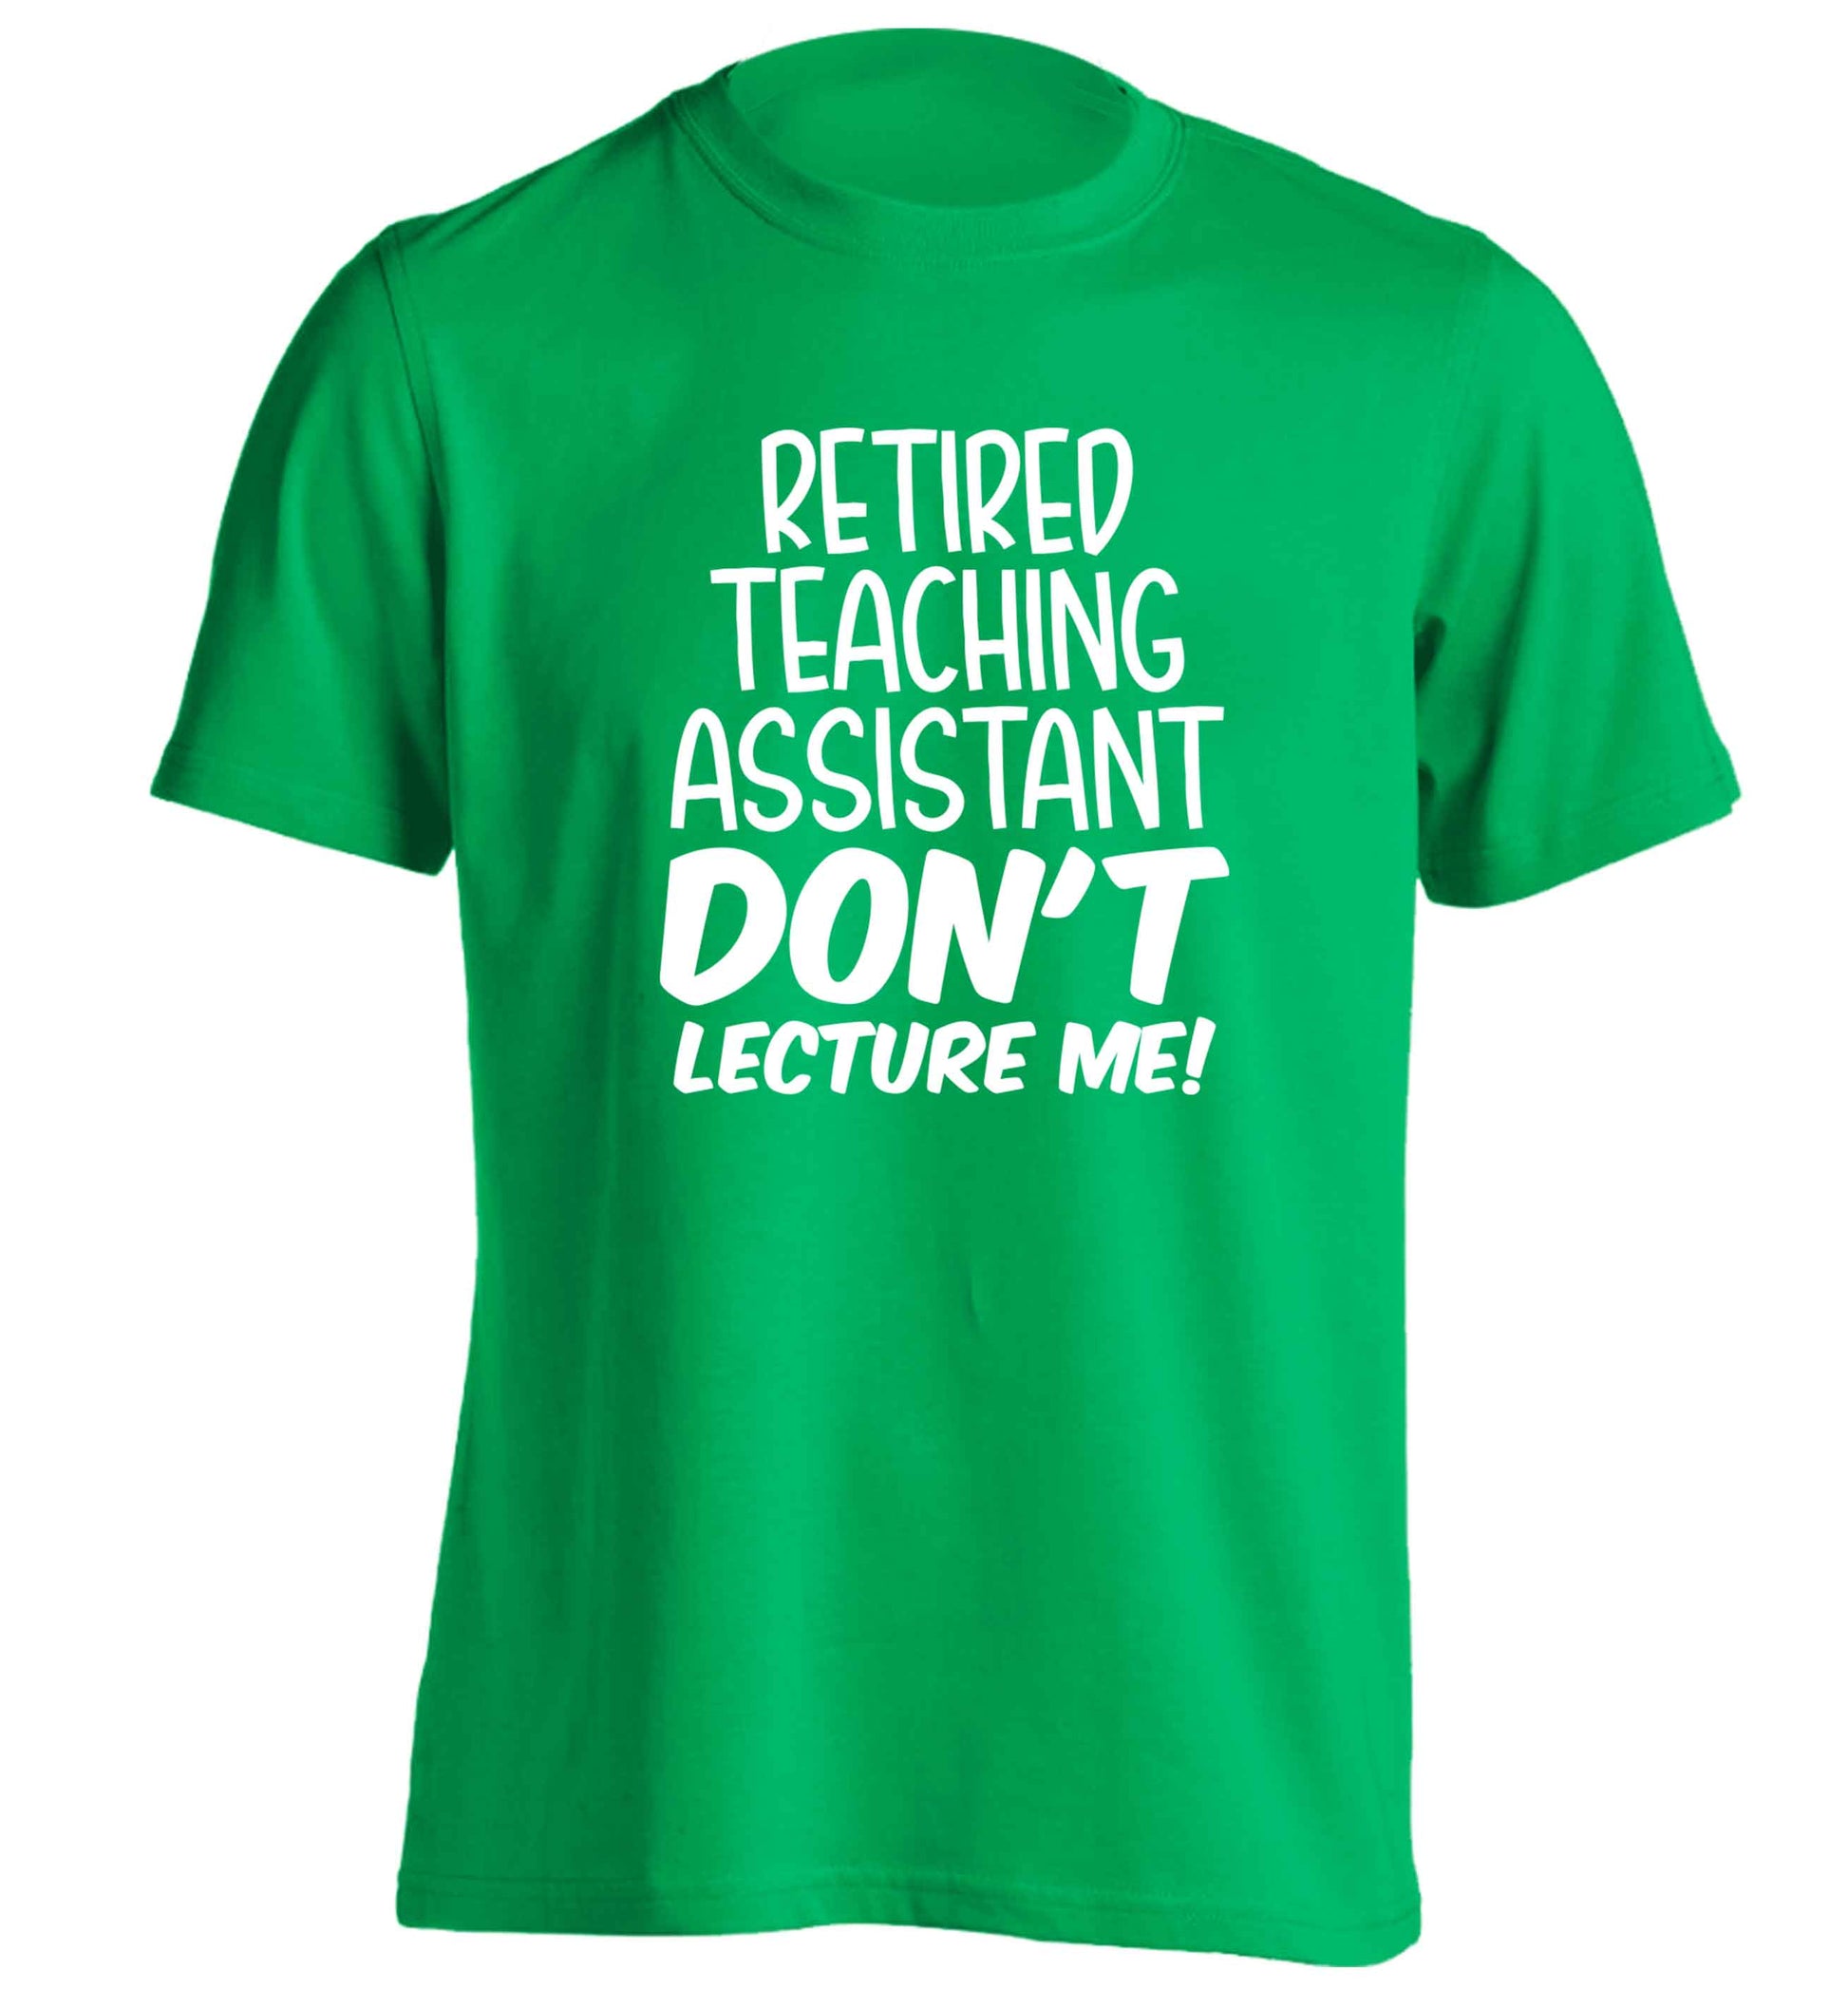 Retired teaching assistant don't lecture me adults unisex green Tshirt 2XL